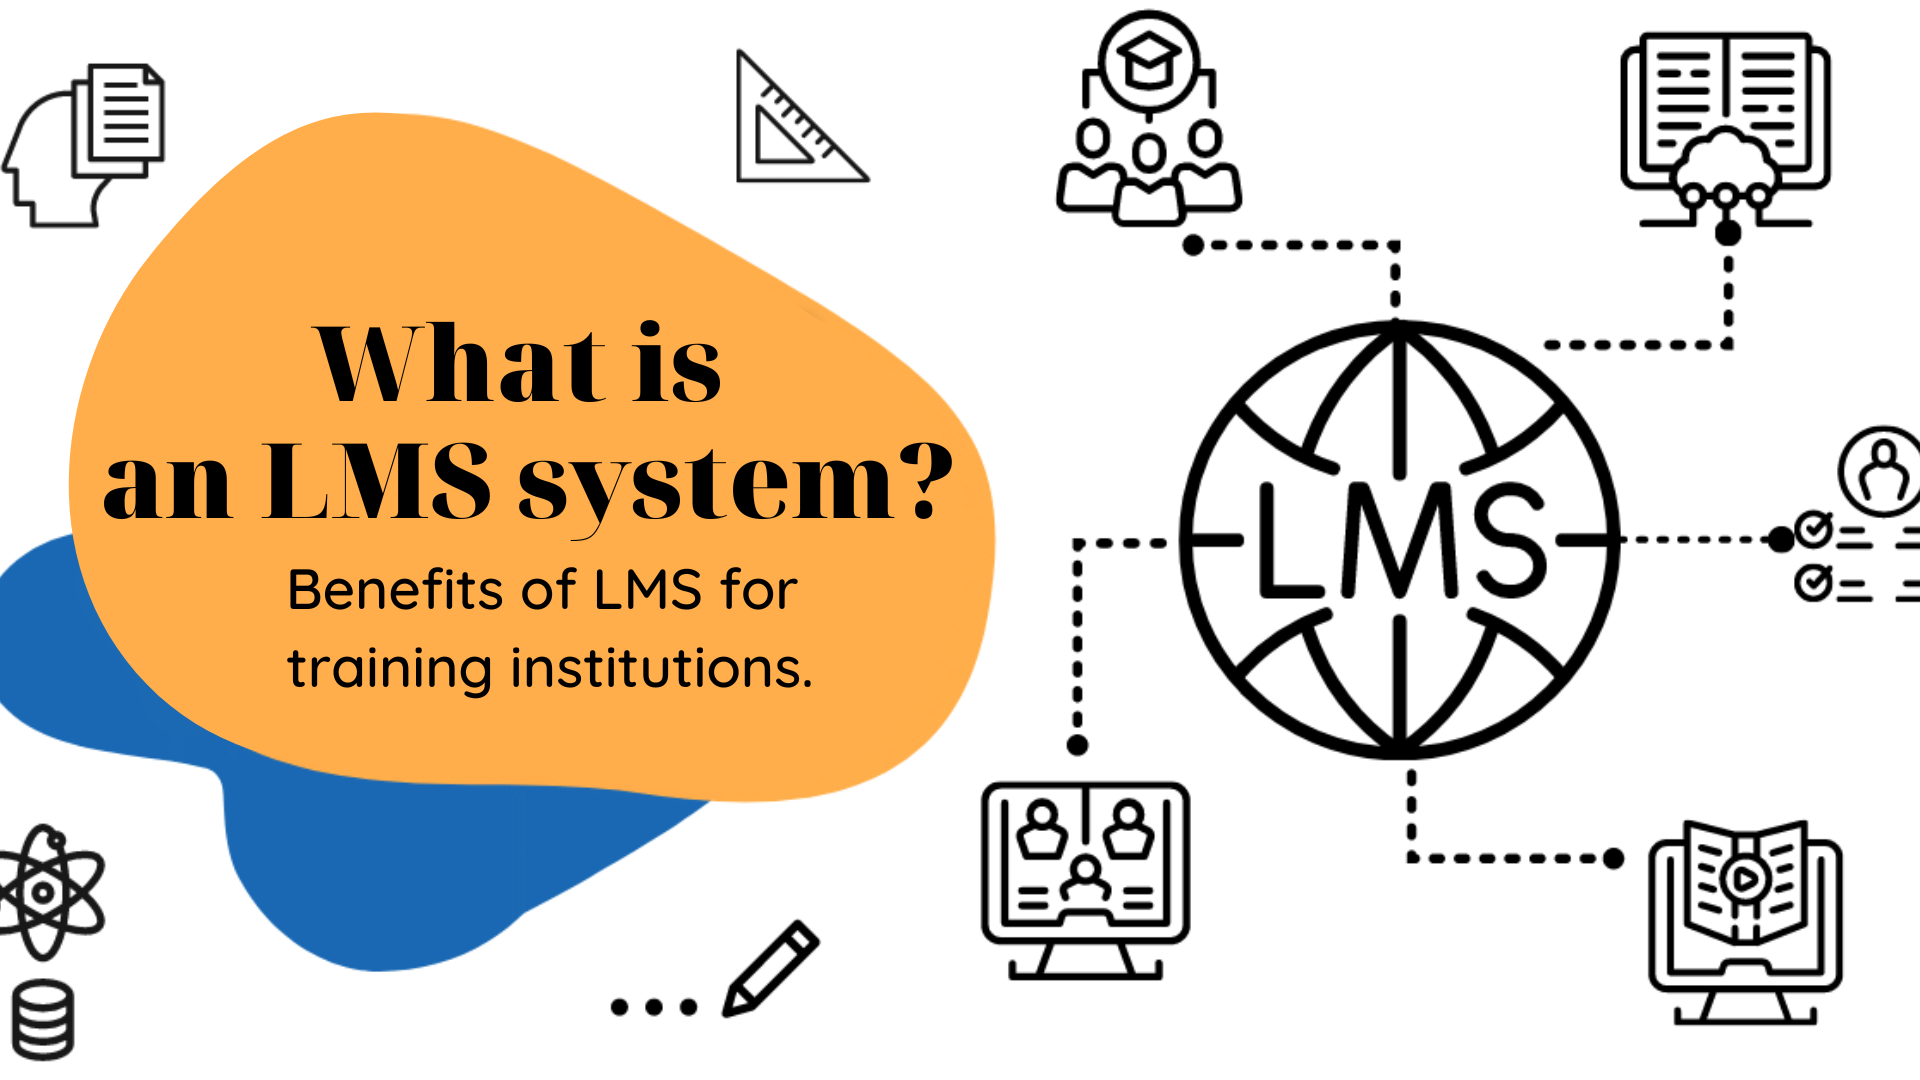 What is an LMS system? Benefits of LMS for training institutions.